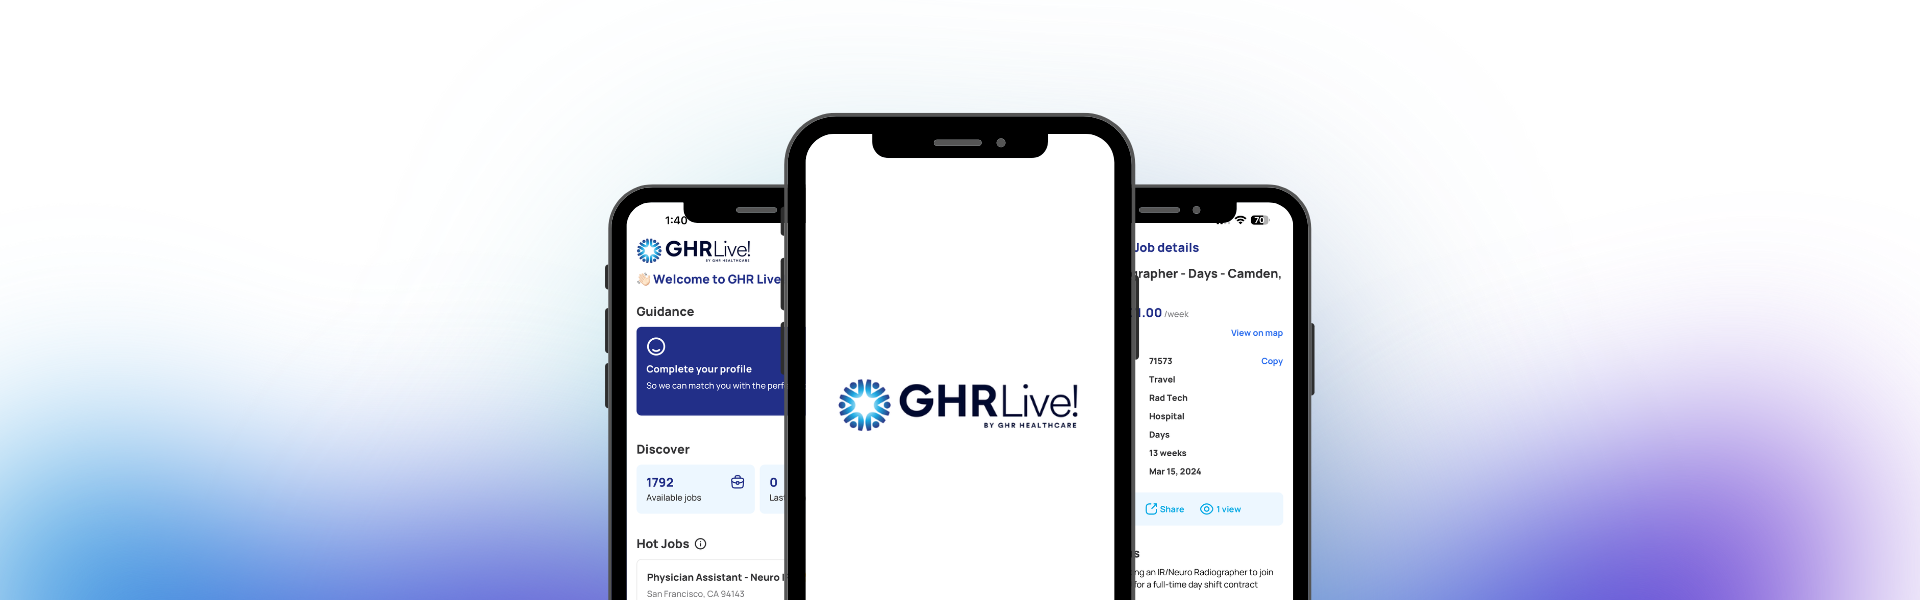 RELEASE: GHR Healthcare Launches GHR Live! – A Comprehensive Healthcare Job Search & Management App